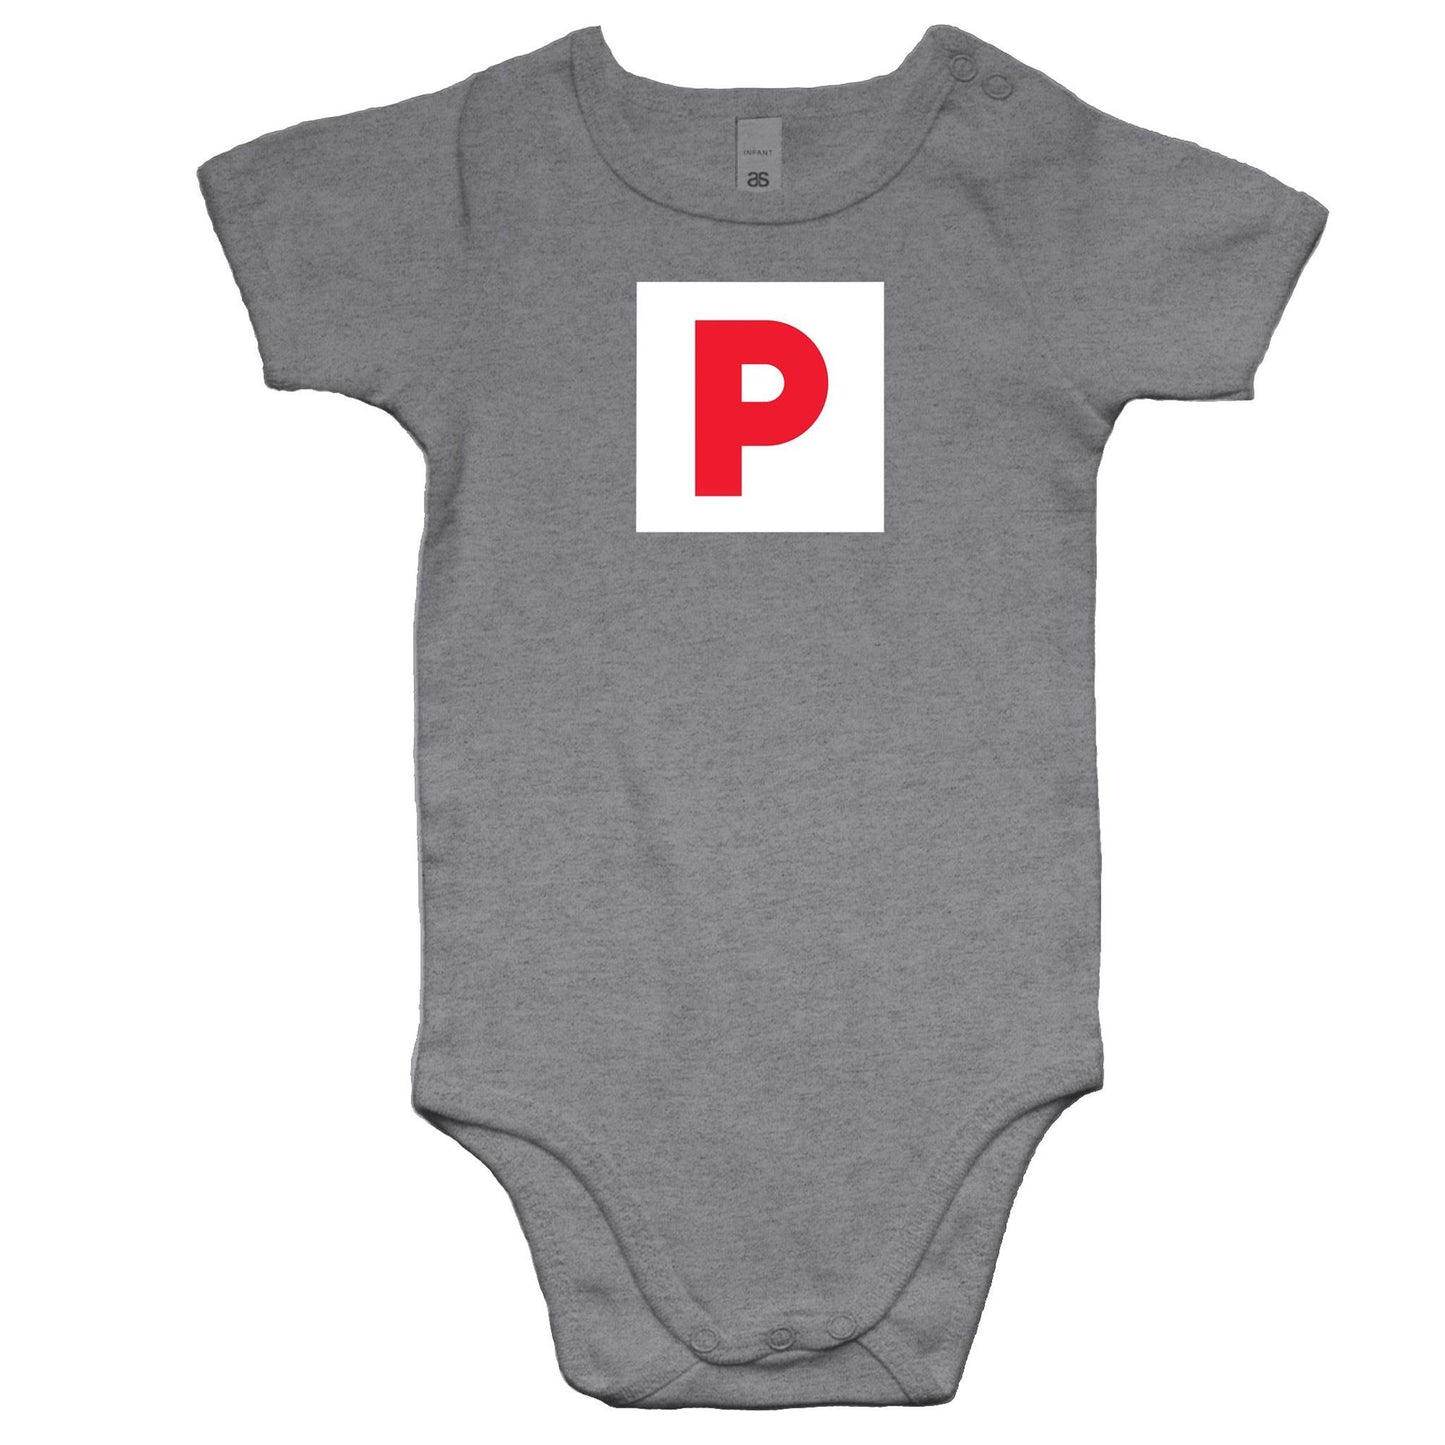 P Plate Rompers for Babies